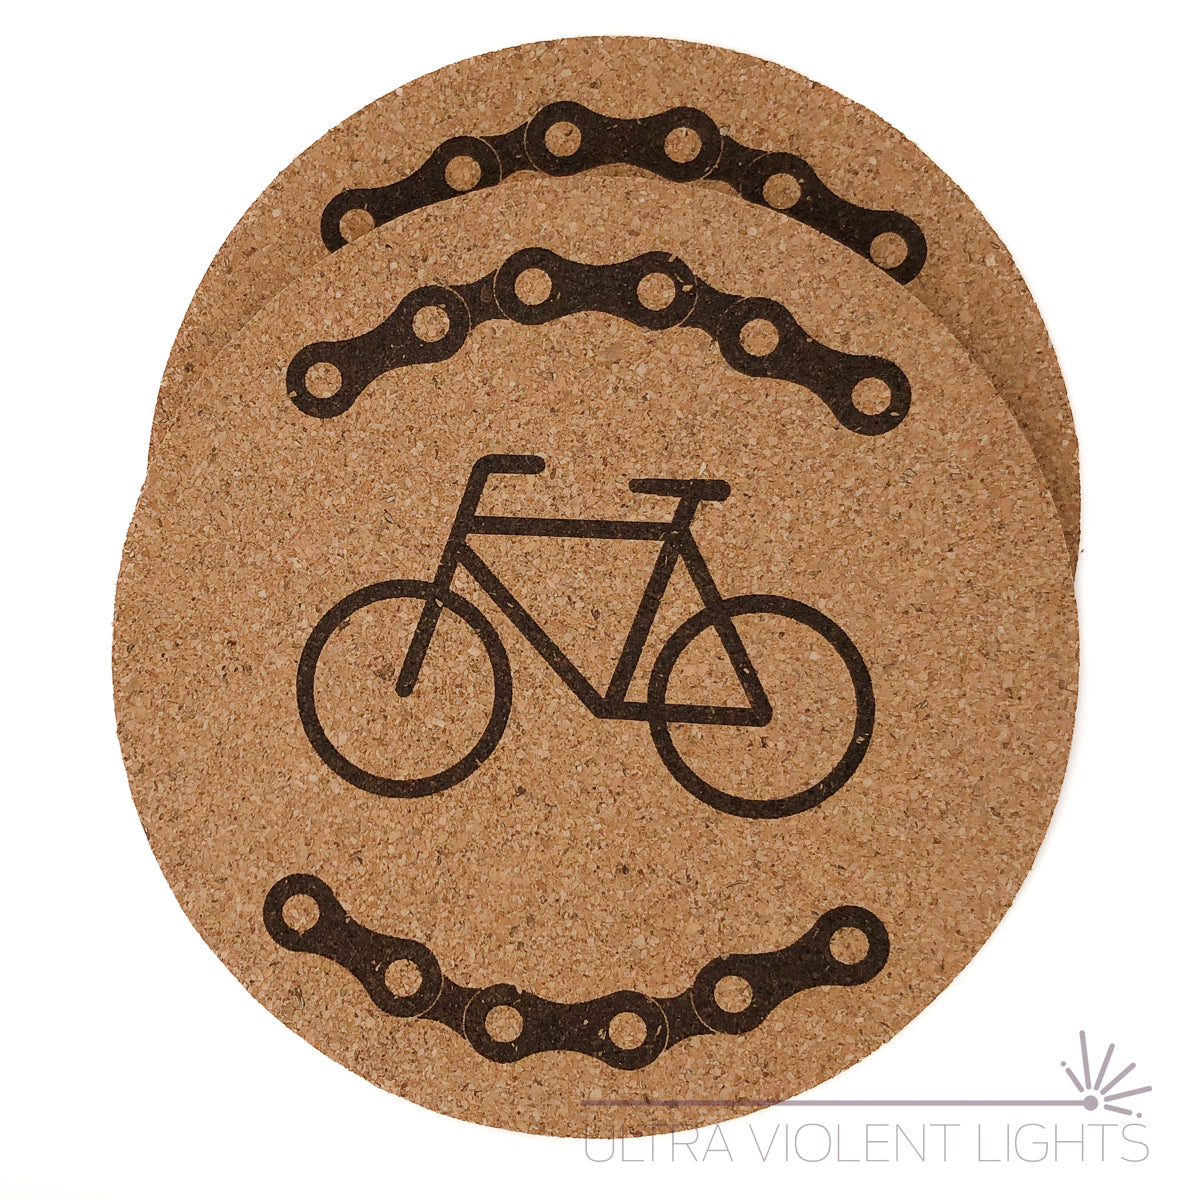 Two cork coasters engraved with bike chains and a bike